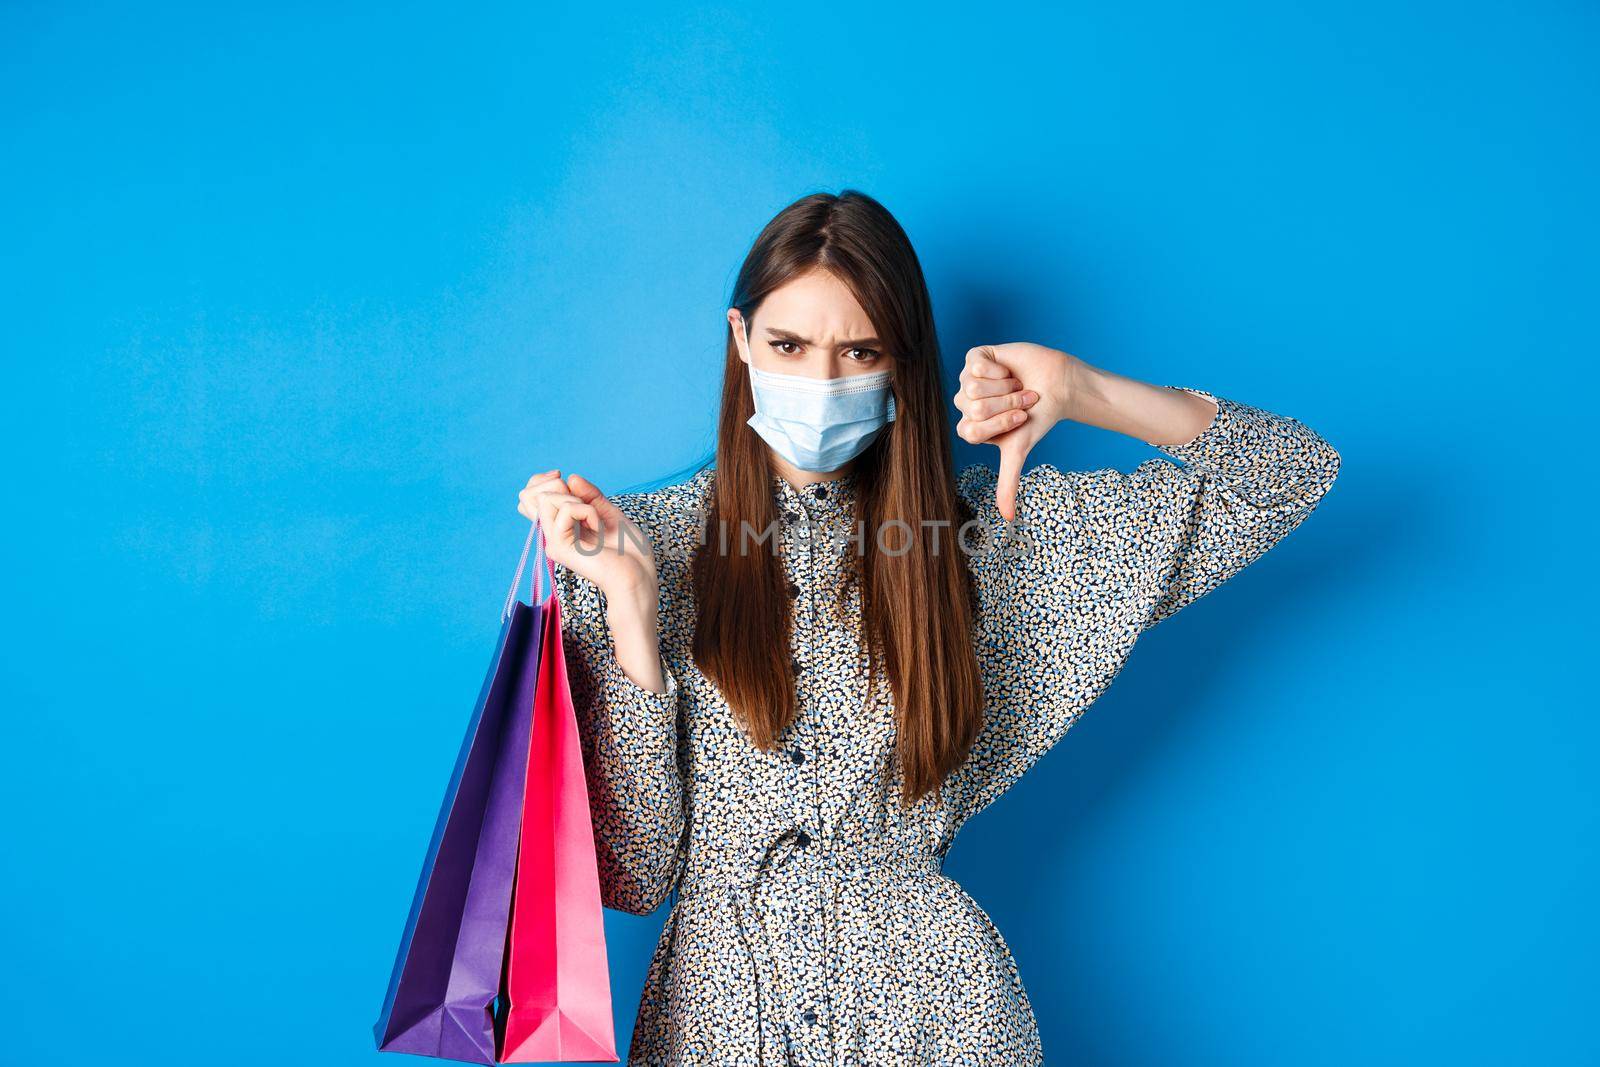 Covid-19, pandemic and lifestyle concept. Angry client in medical mask showing thumb down in dislike, frowning upset, holding shopping bags, blue background.